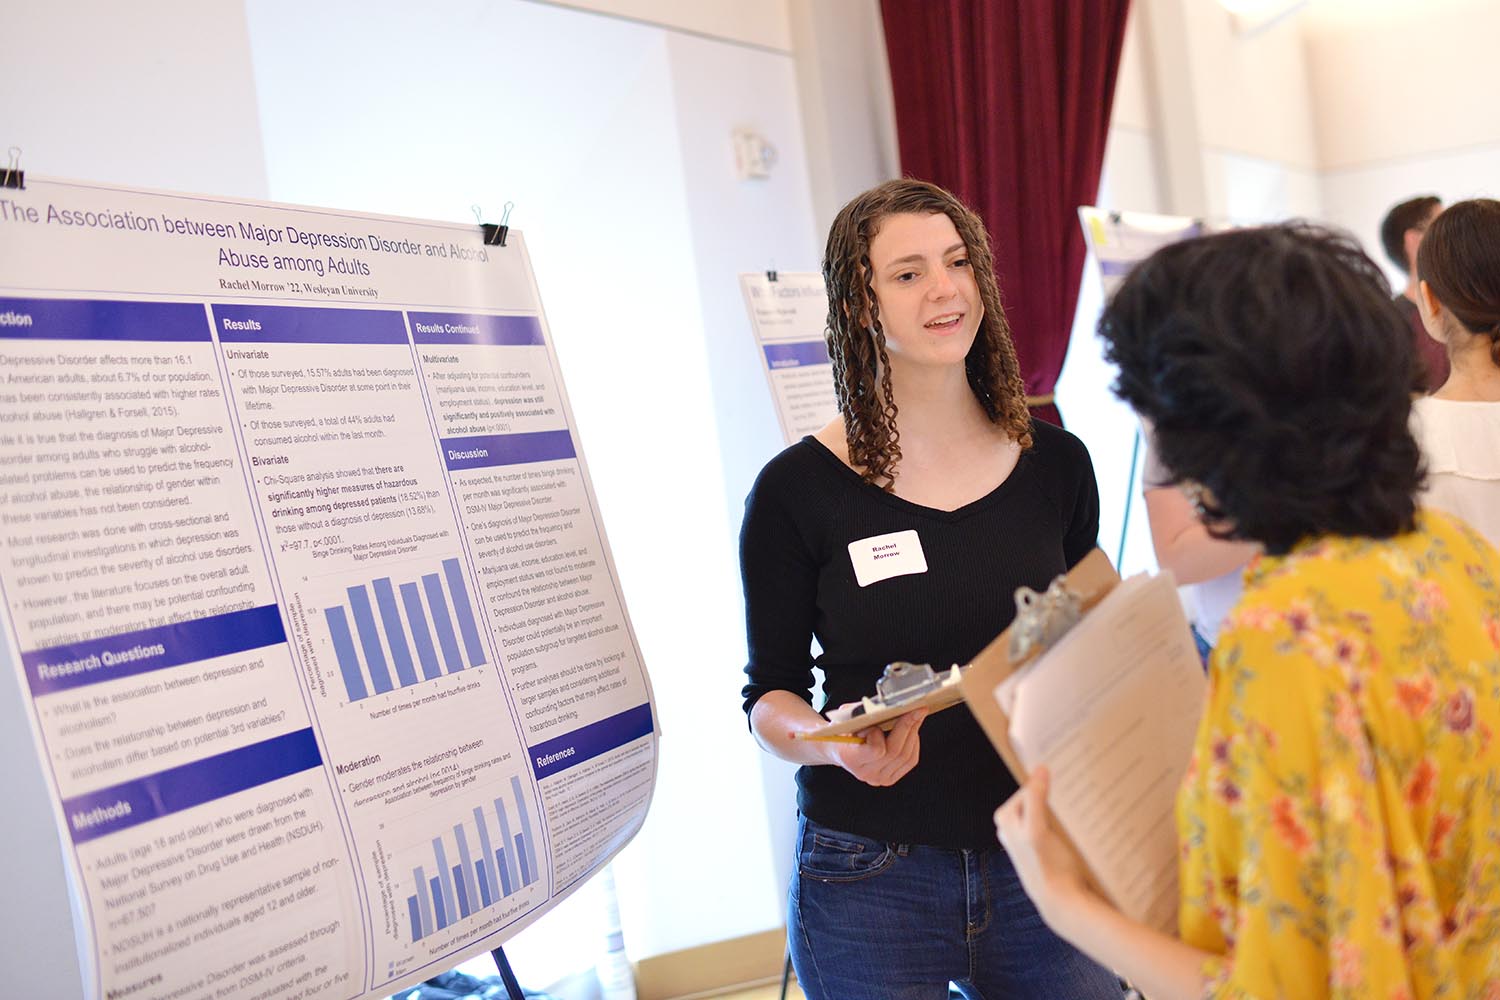 Rachel Morrow '22 discussed "The Association between Major Depression Disorder and Alcohol Abuse among Adults."